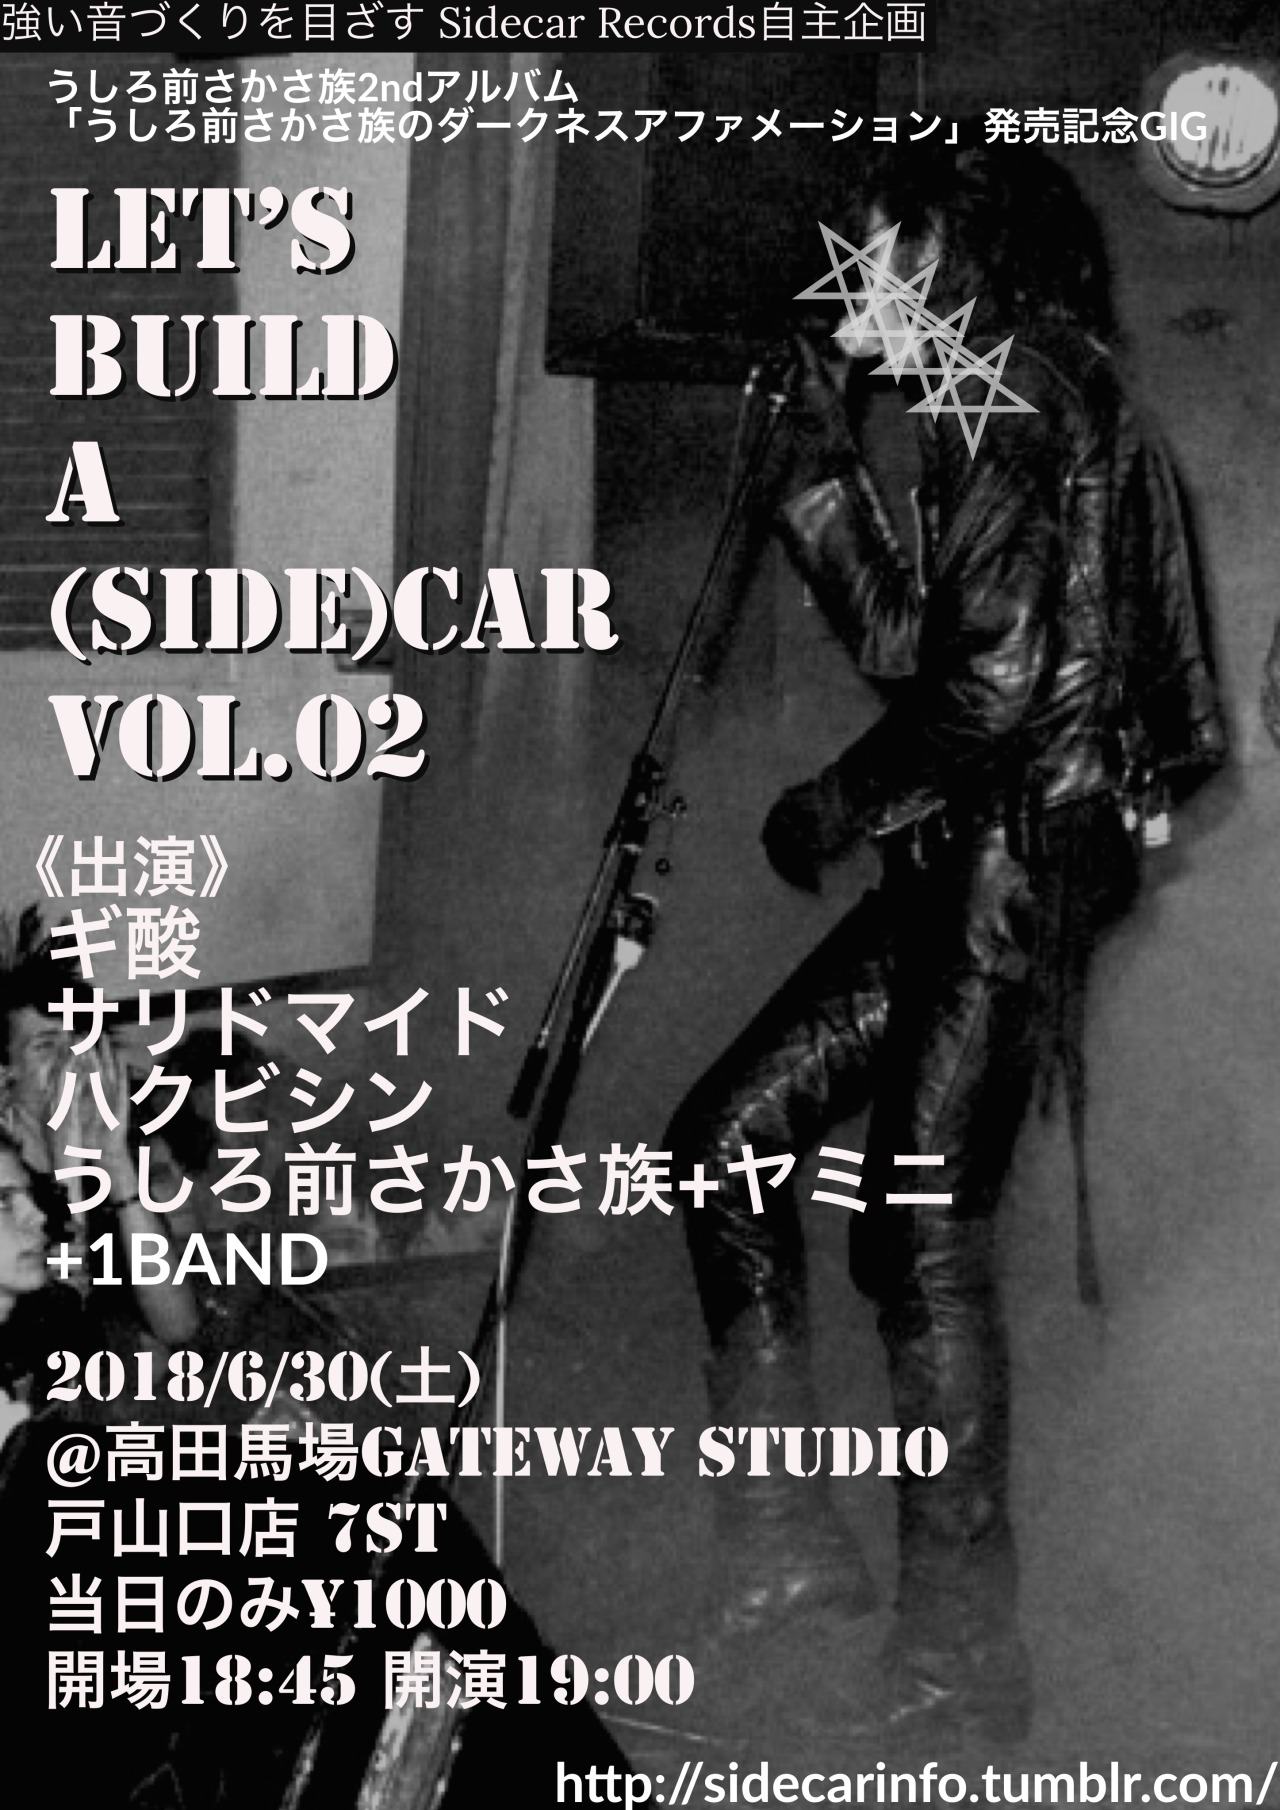 Sidecar Records Information